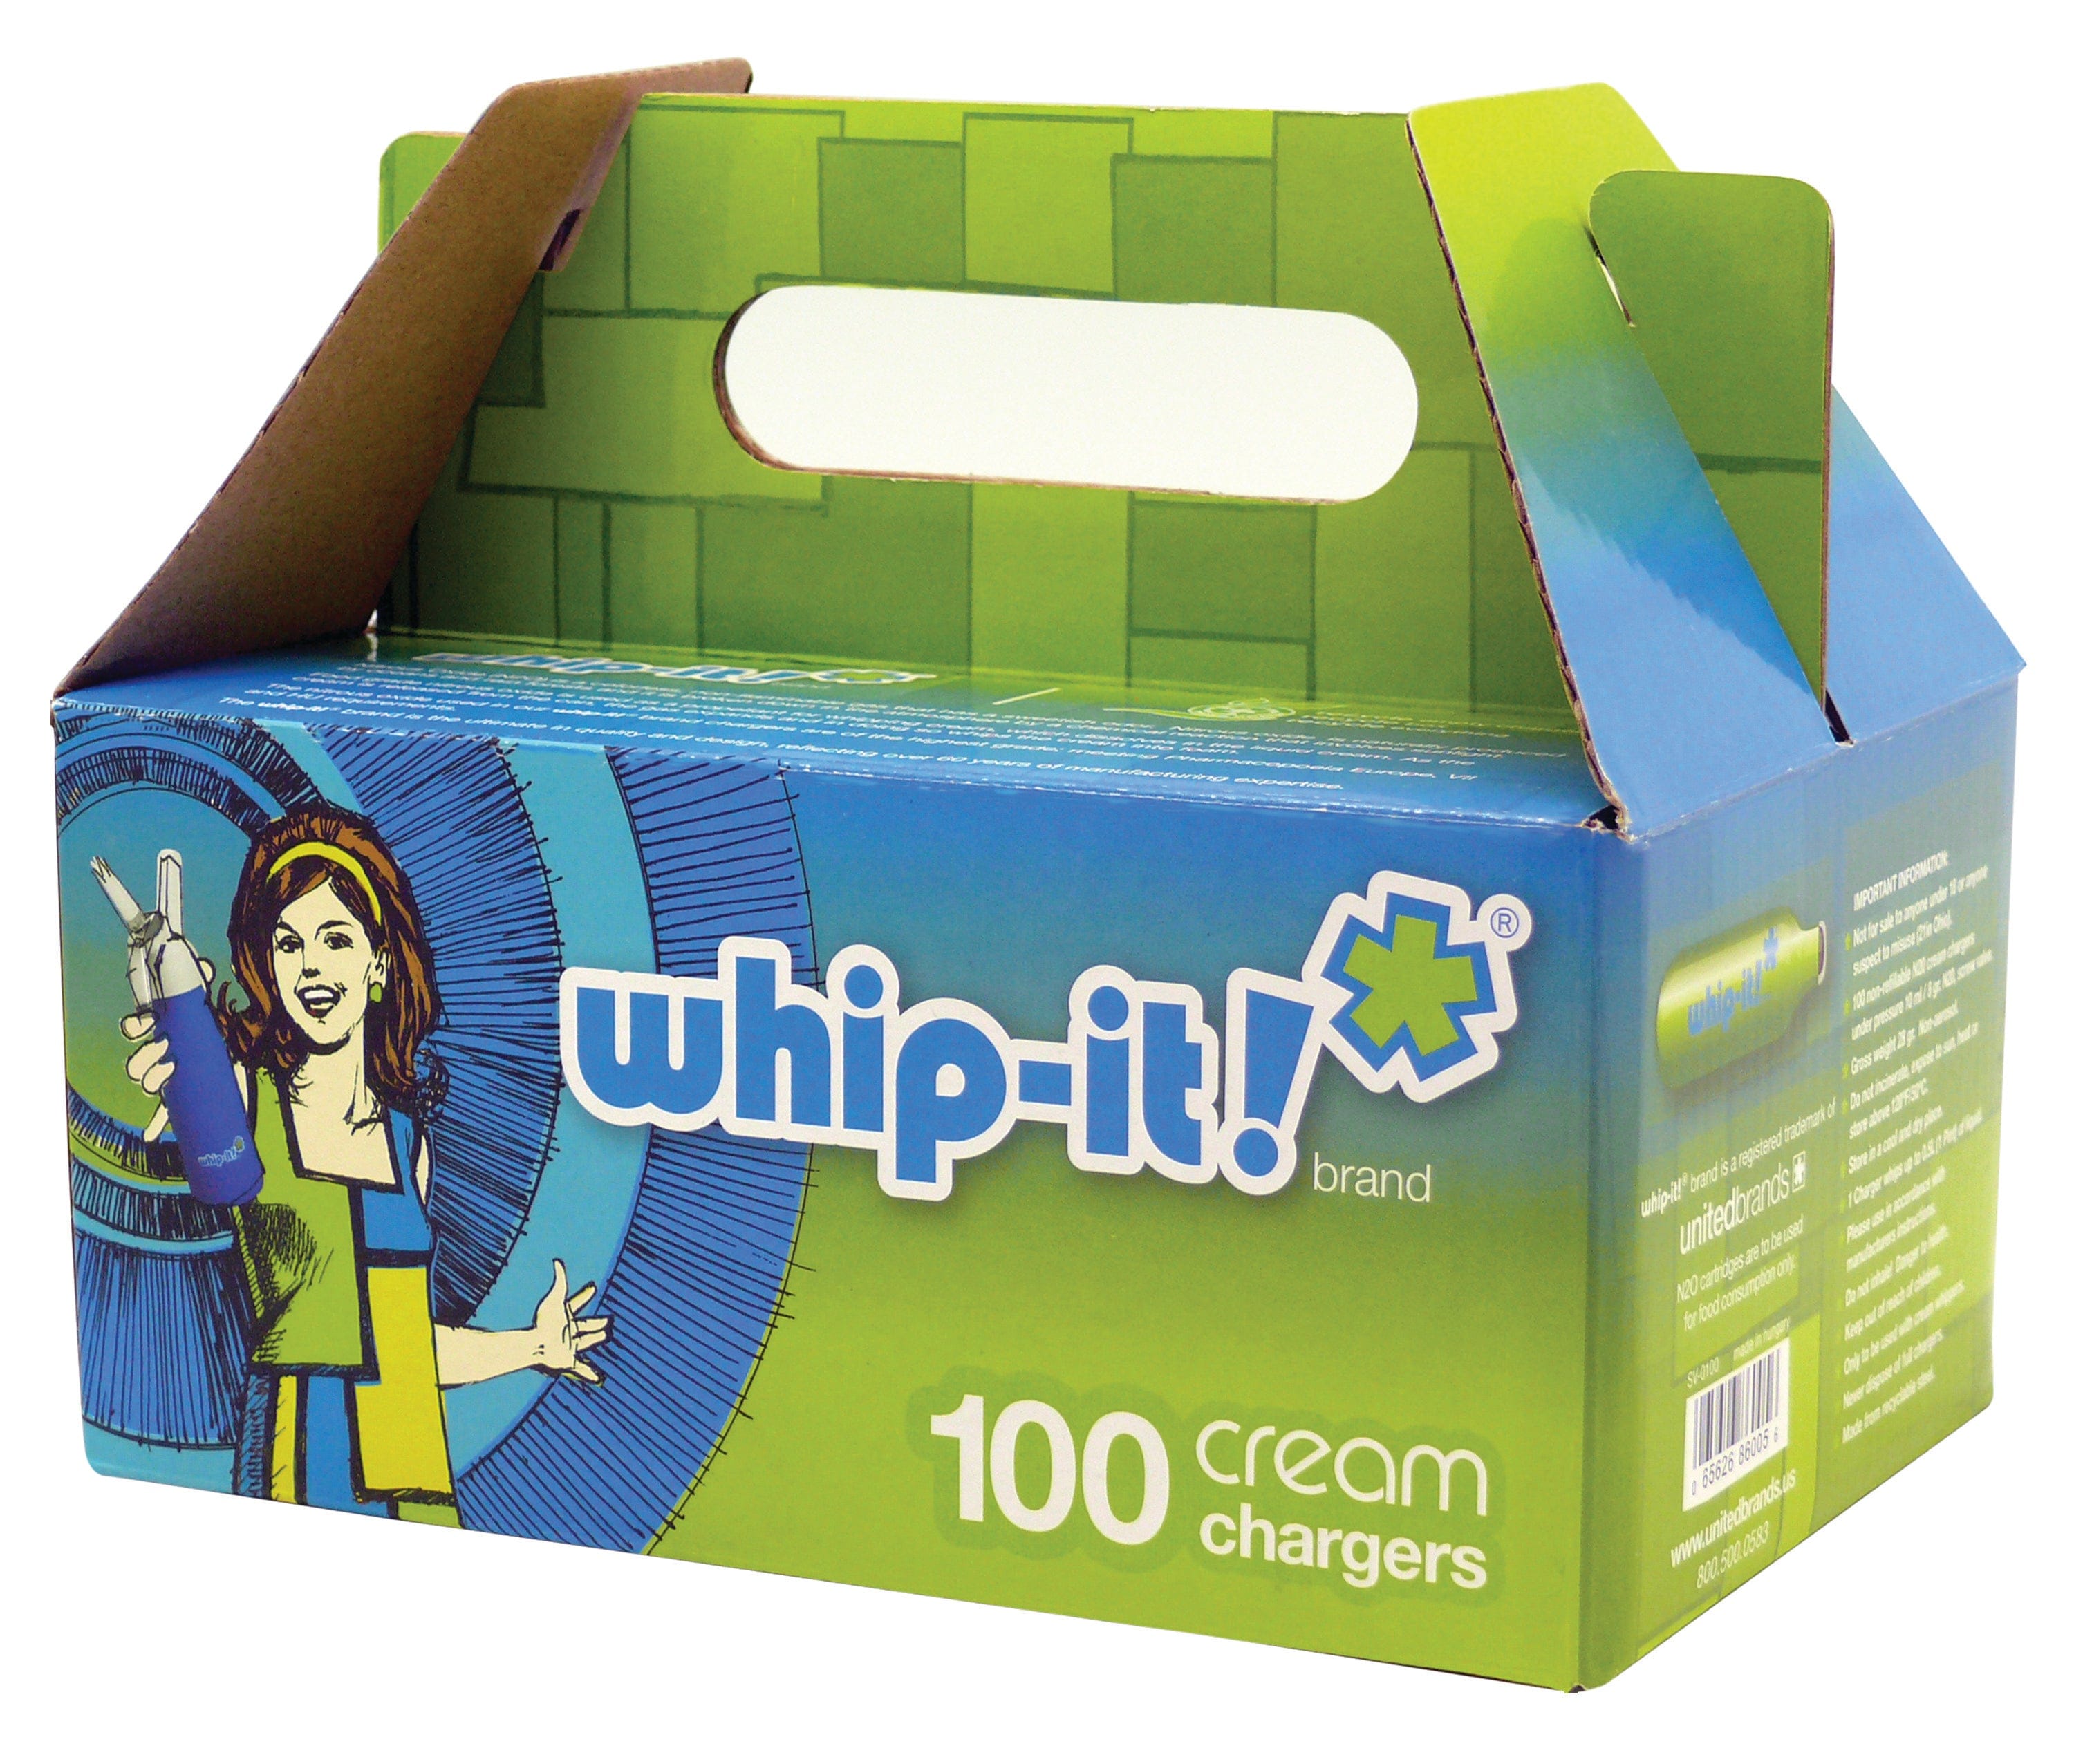 Wholesale Whip-It! Cream Chargers - 100pks